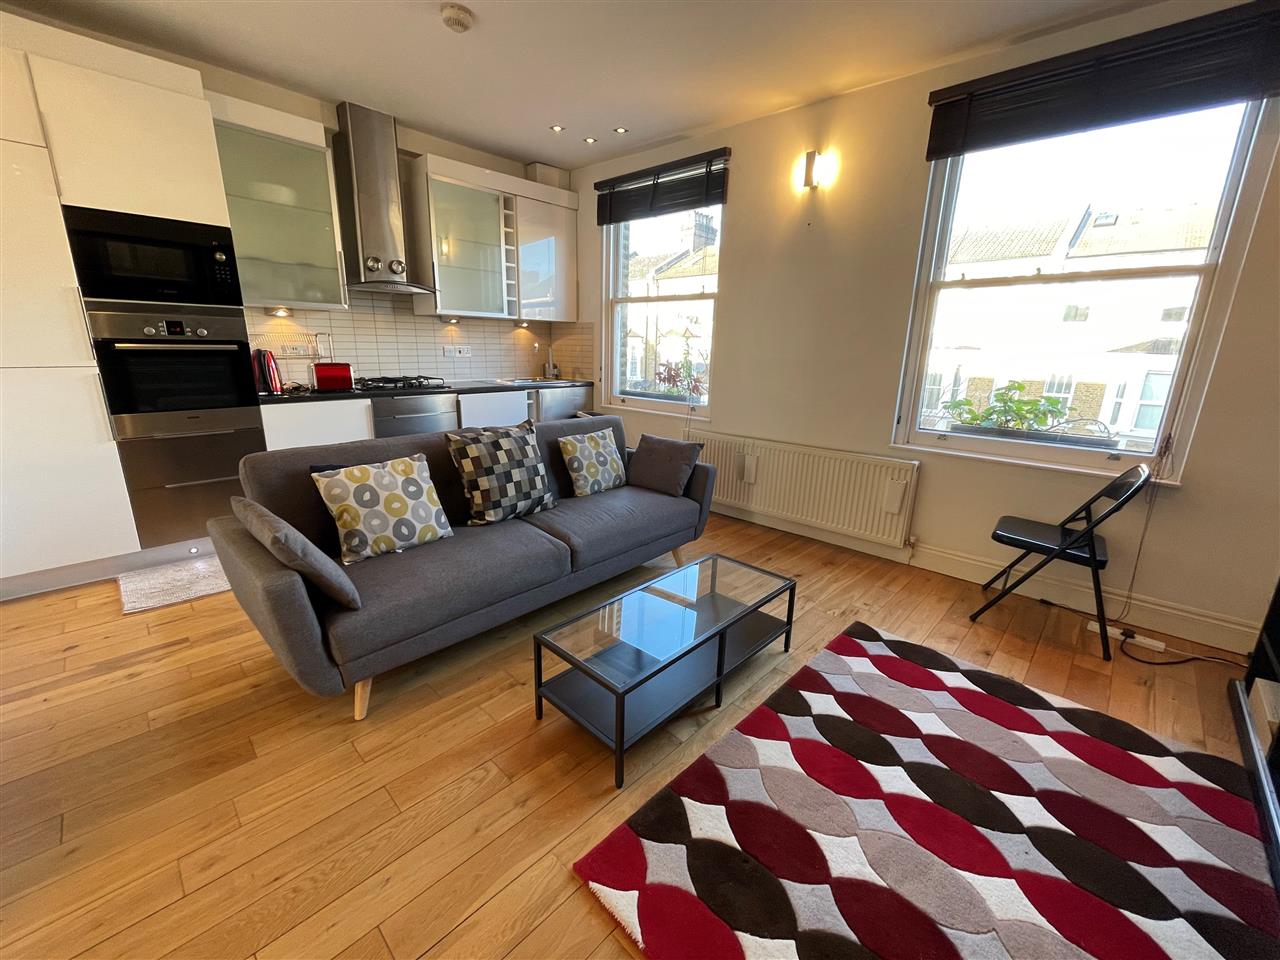 AVAILABLE IMMEDIATELY !  Well Presented split level MAJORITY FURNISHED converted flat on the upper floors on a centre terrace period house. The accommodation comprises of two double bedrooms, a modern bathroom and open plan living space with equipped kitchen. Further benefits include partial ...